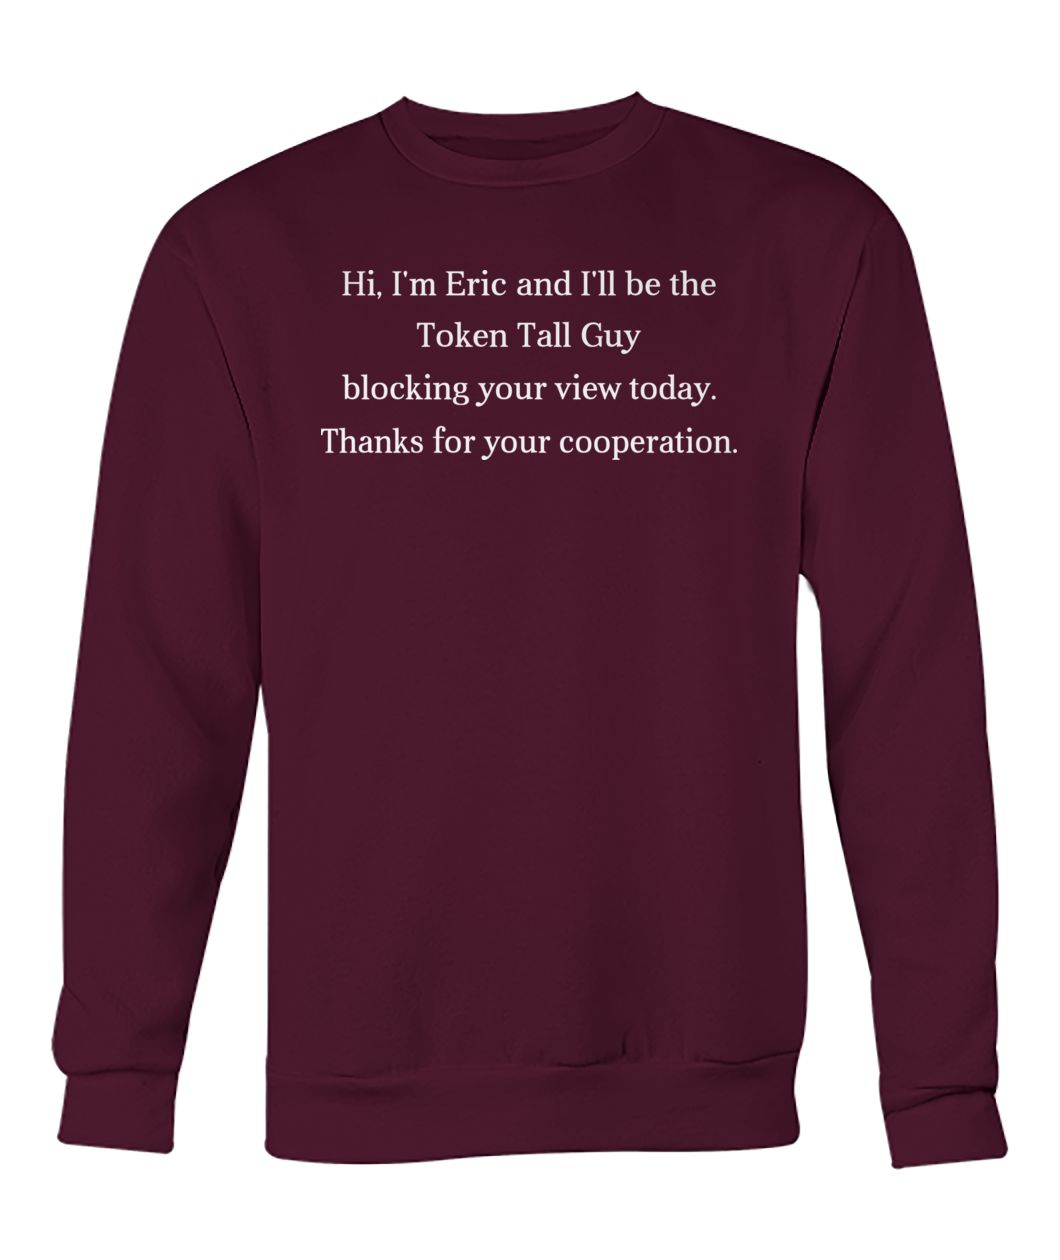 Hi I'm eric and I'll be the token tall guy blocking your view today crew neck sweatshirt